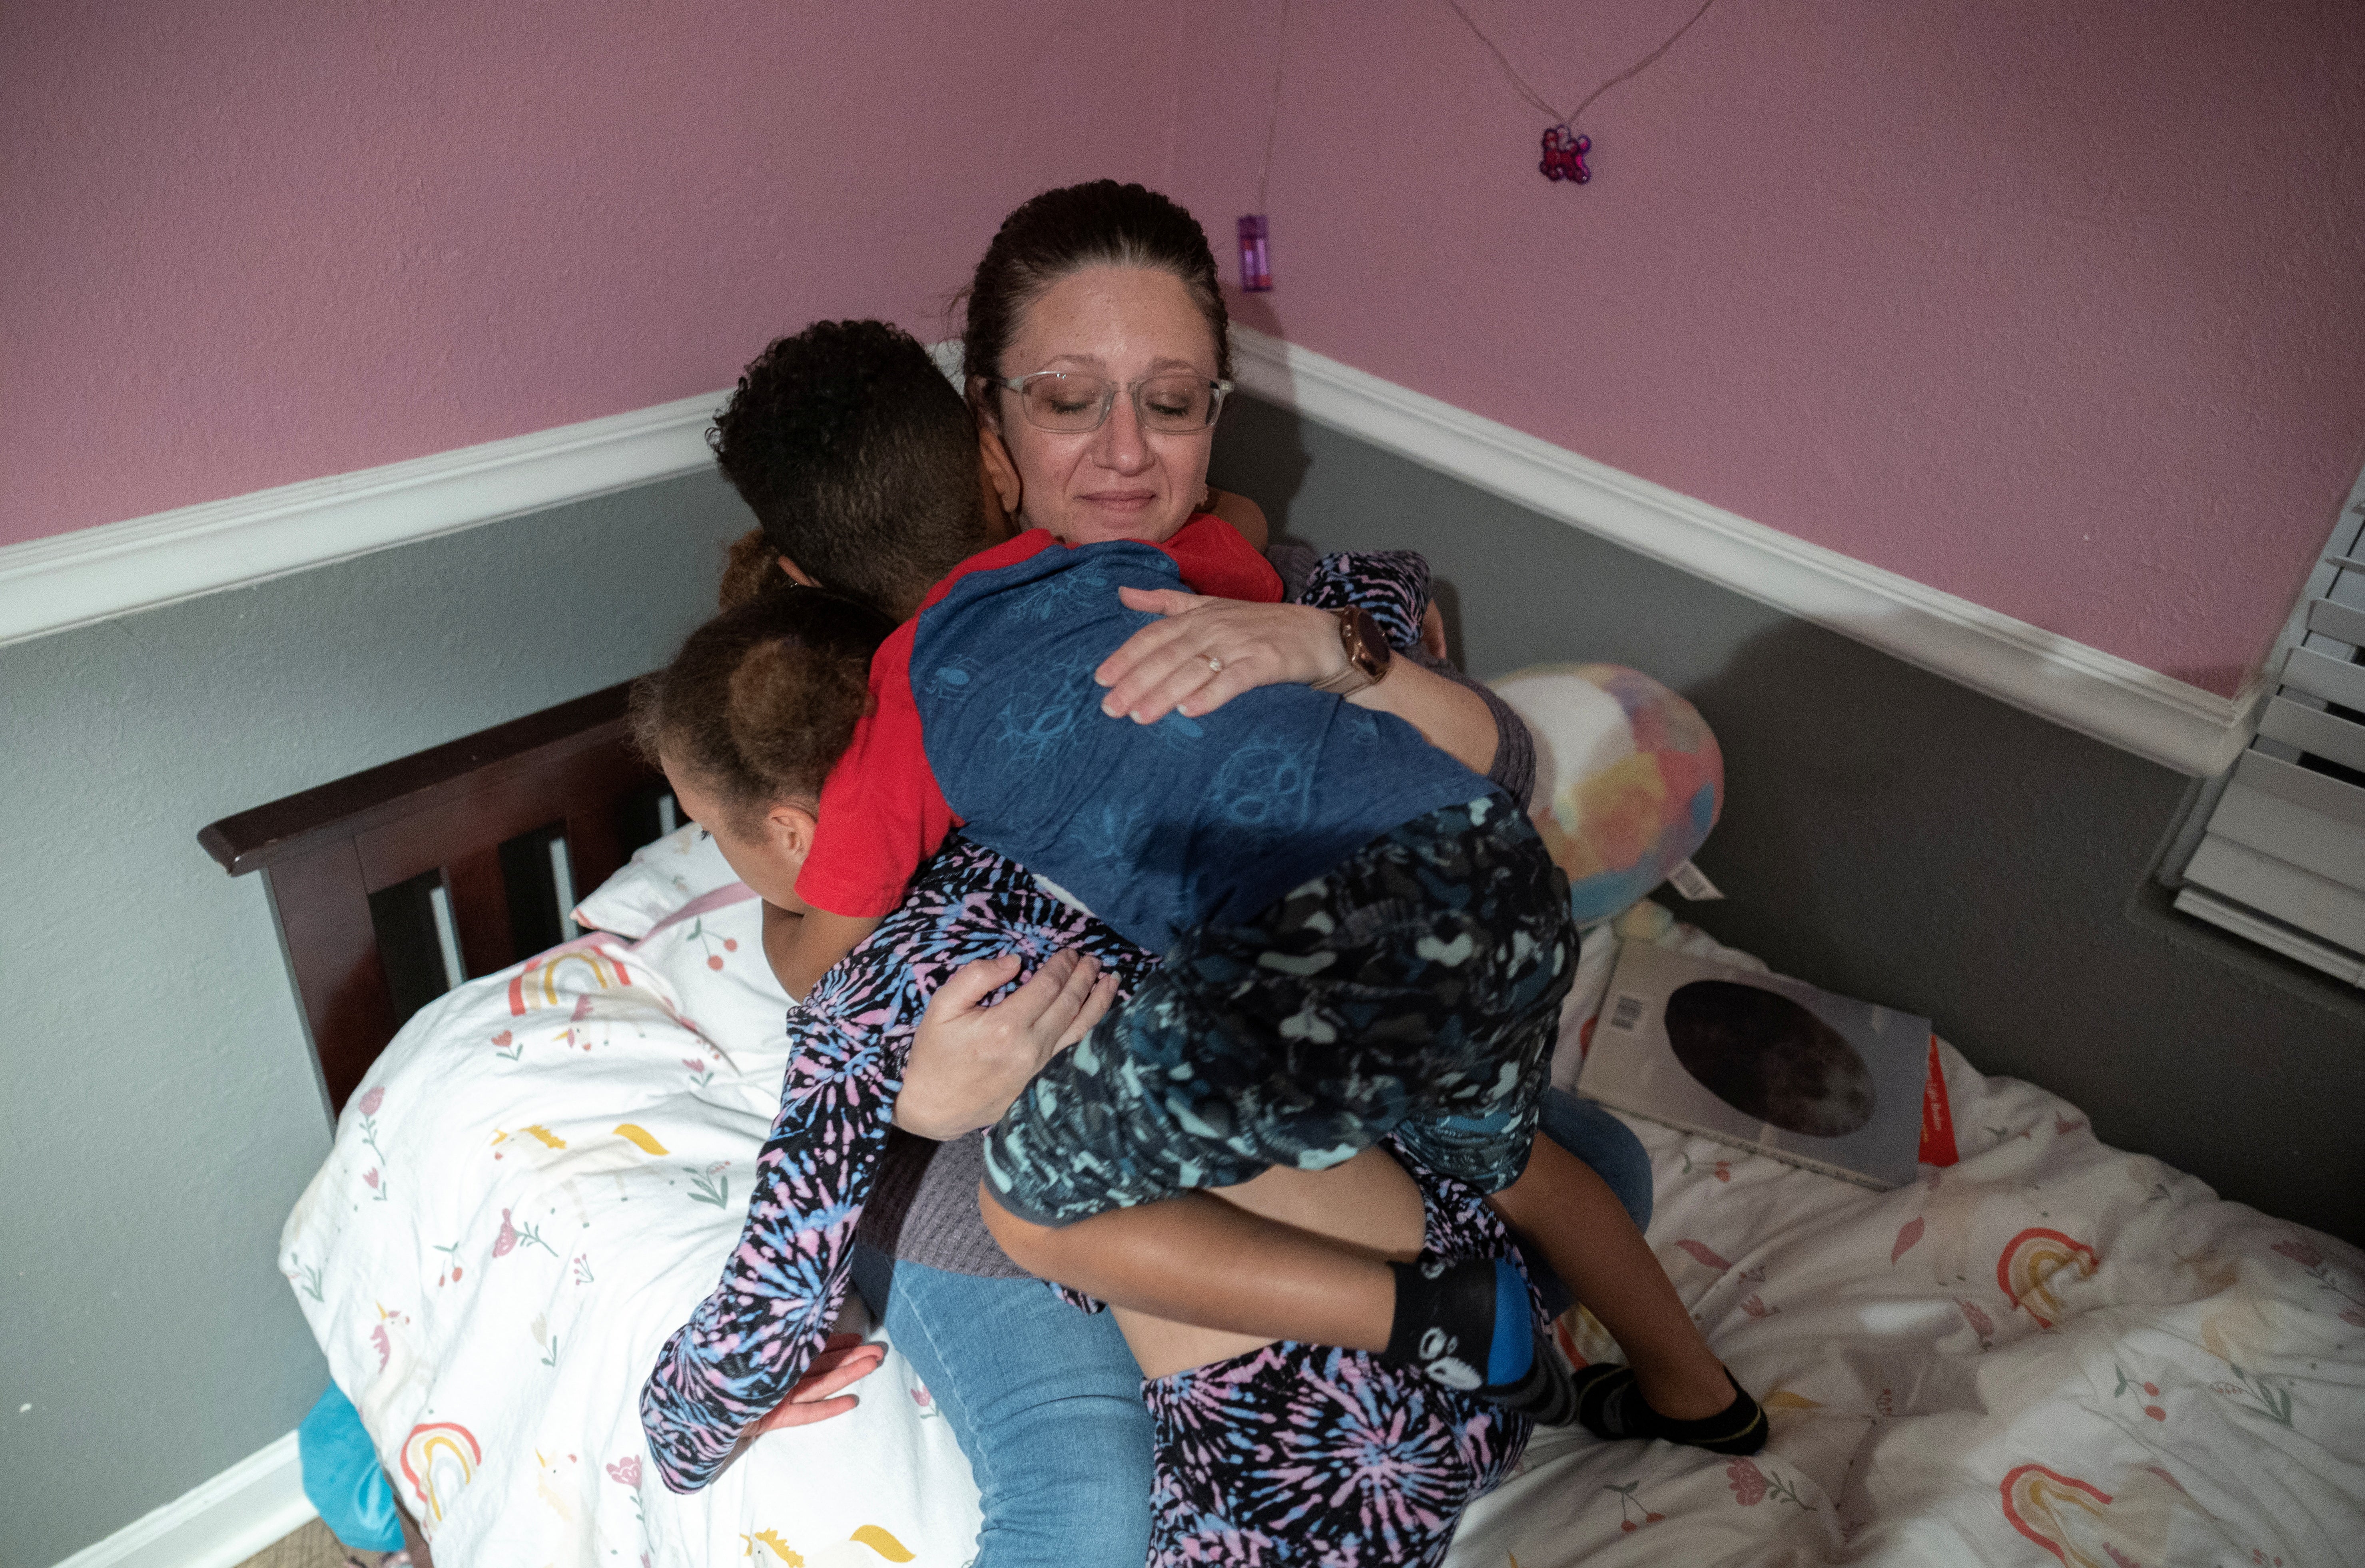 Gallegos hugs her children as she puts them to bed at her home the night before she leaves for Carbondale, Illinois, to spend several days running the Alamo Women’s Clinic, in San Antonio, Texas